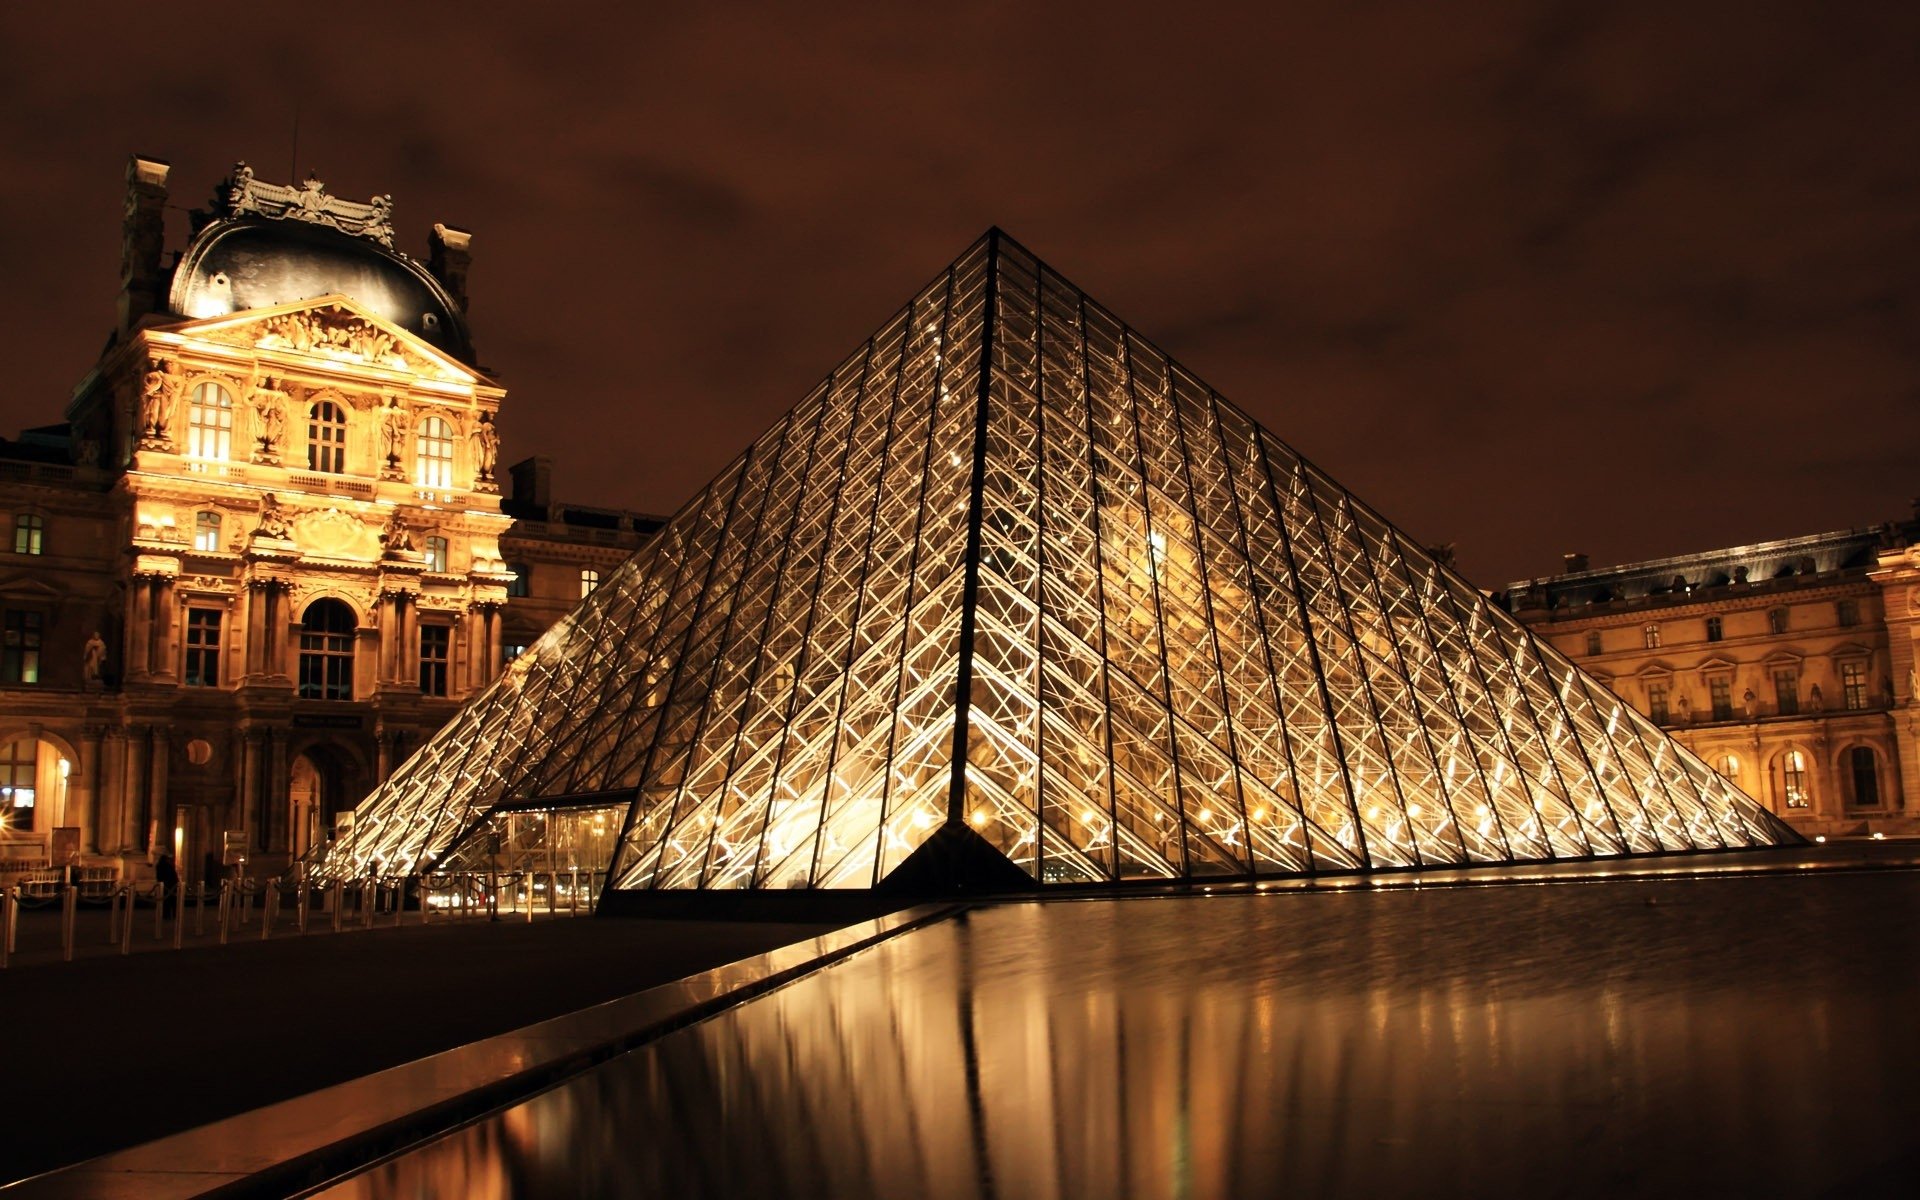 The Louvre HD Wallpaper Background Image